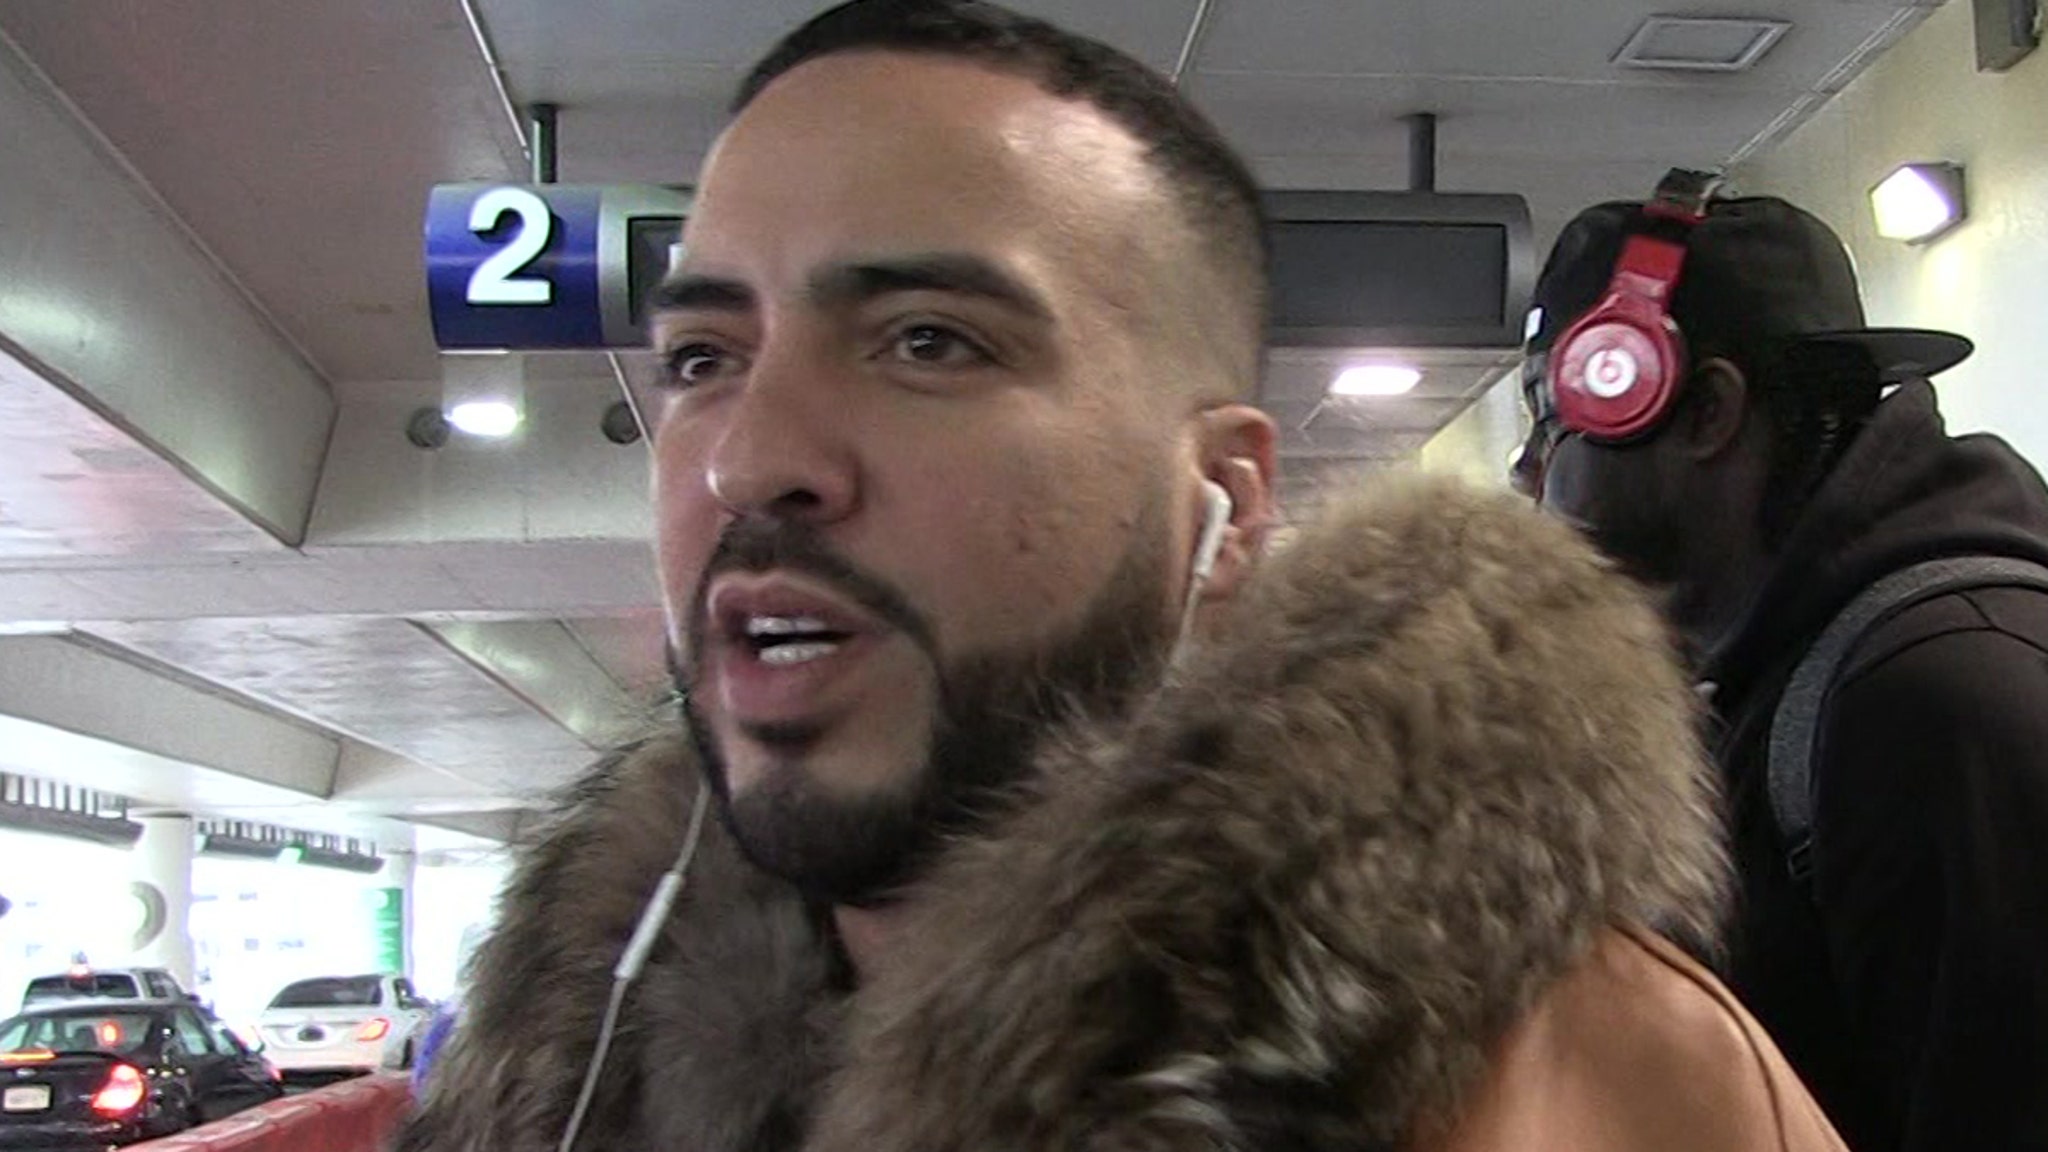 French Montana Aiming To Help Undocumented Families With Org Partnership